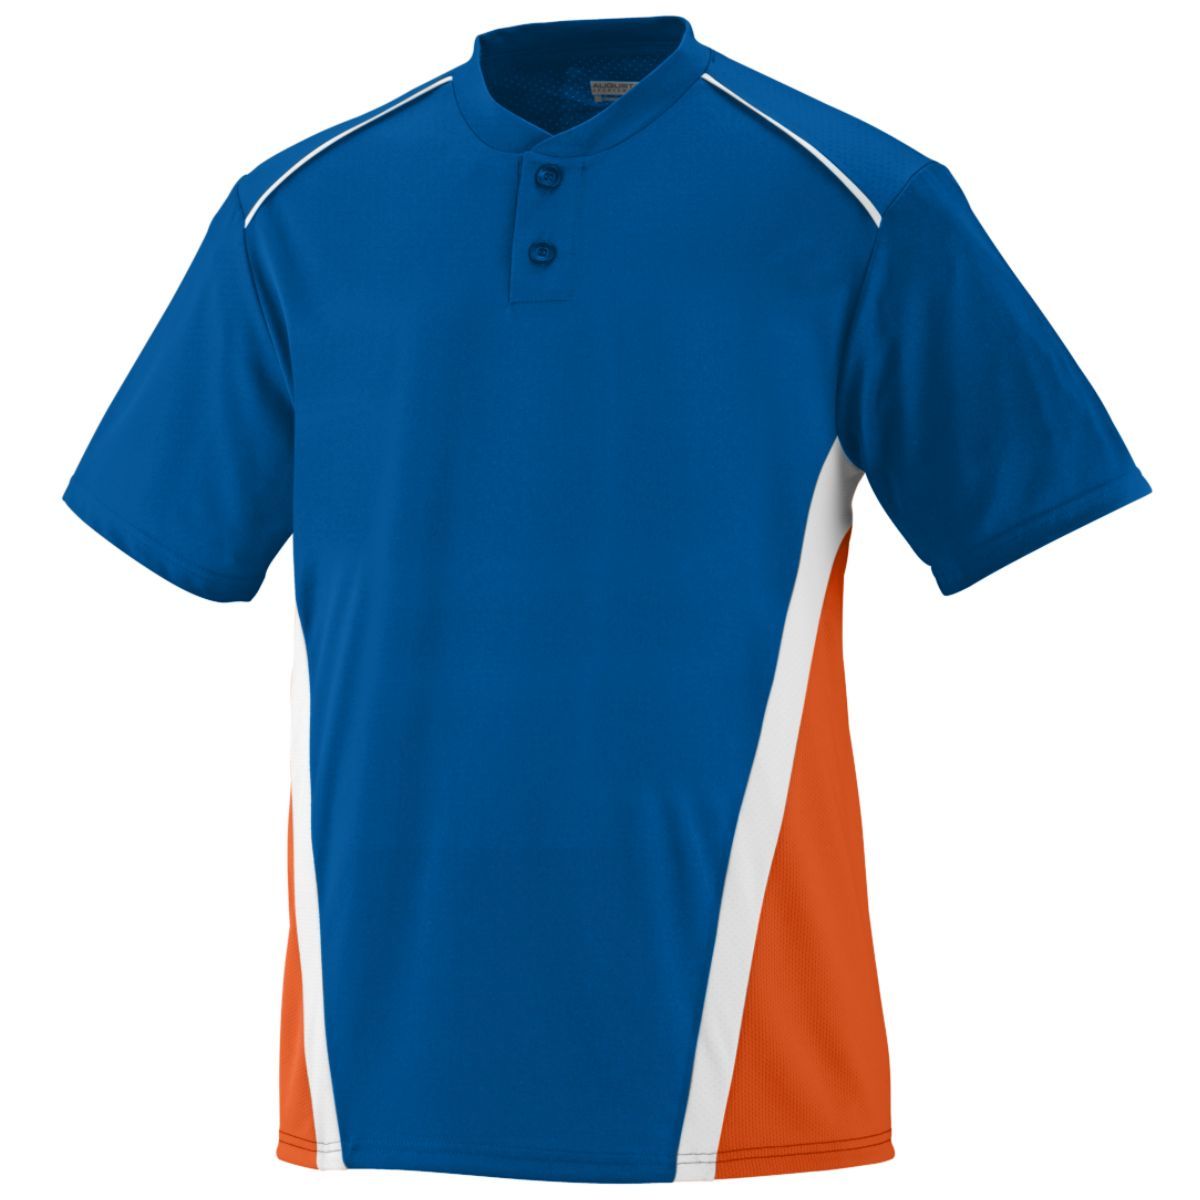 Augusta Sportswear Rbi Jersey in Royal/Orange/White  -Part of the Adult, Adult-Jersey, Augusta-Products, Softball, Shirts product lines at KanaleyCreations.com